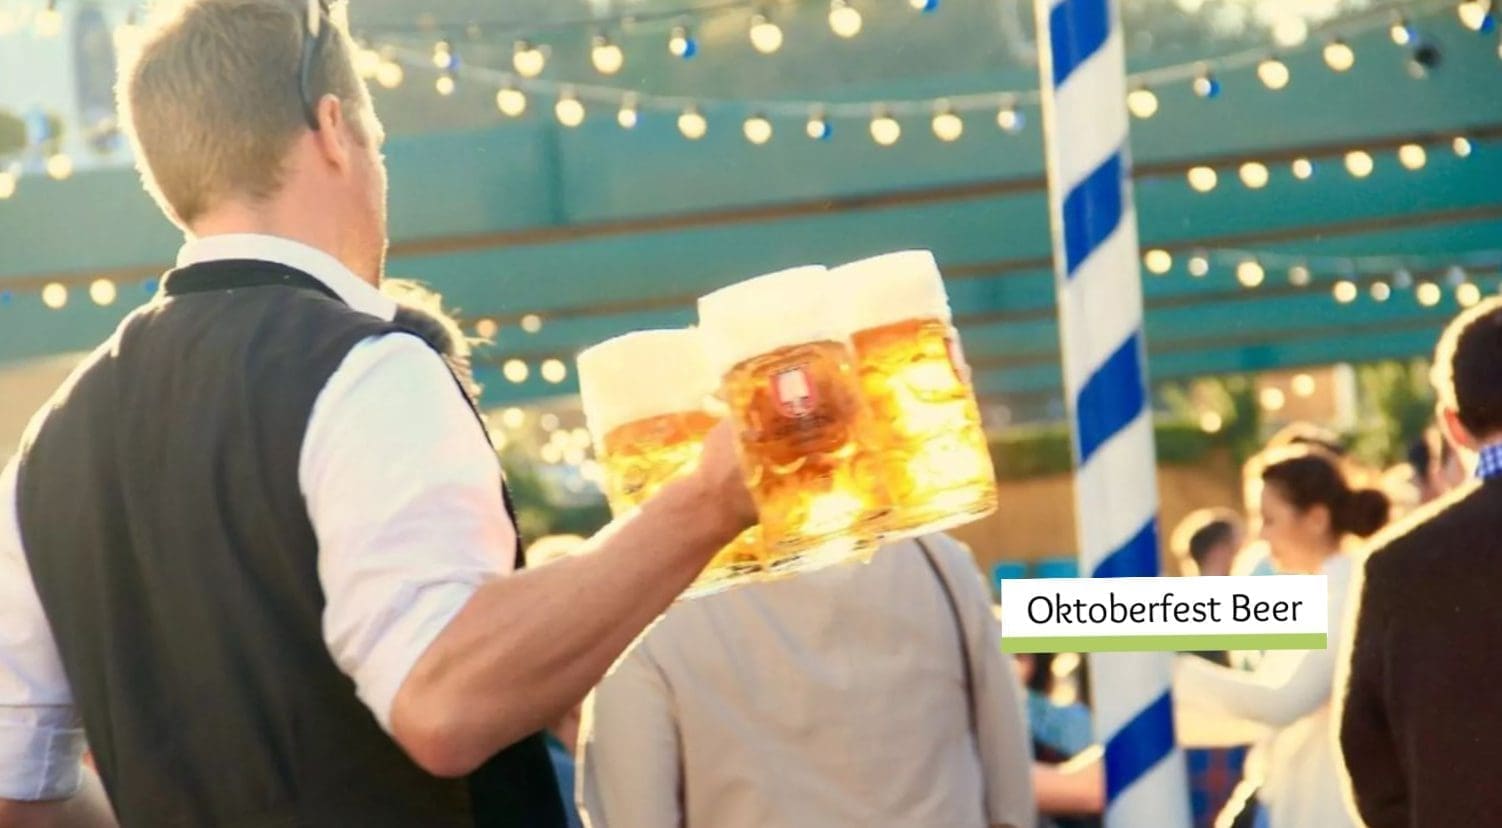 What is Oktoberfest Bier? And what makes it Special?